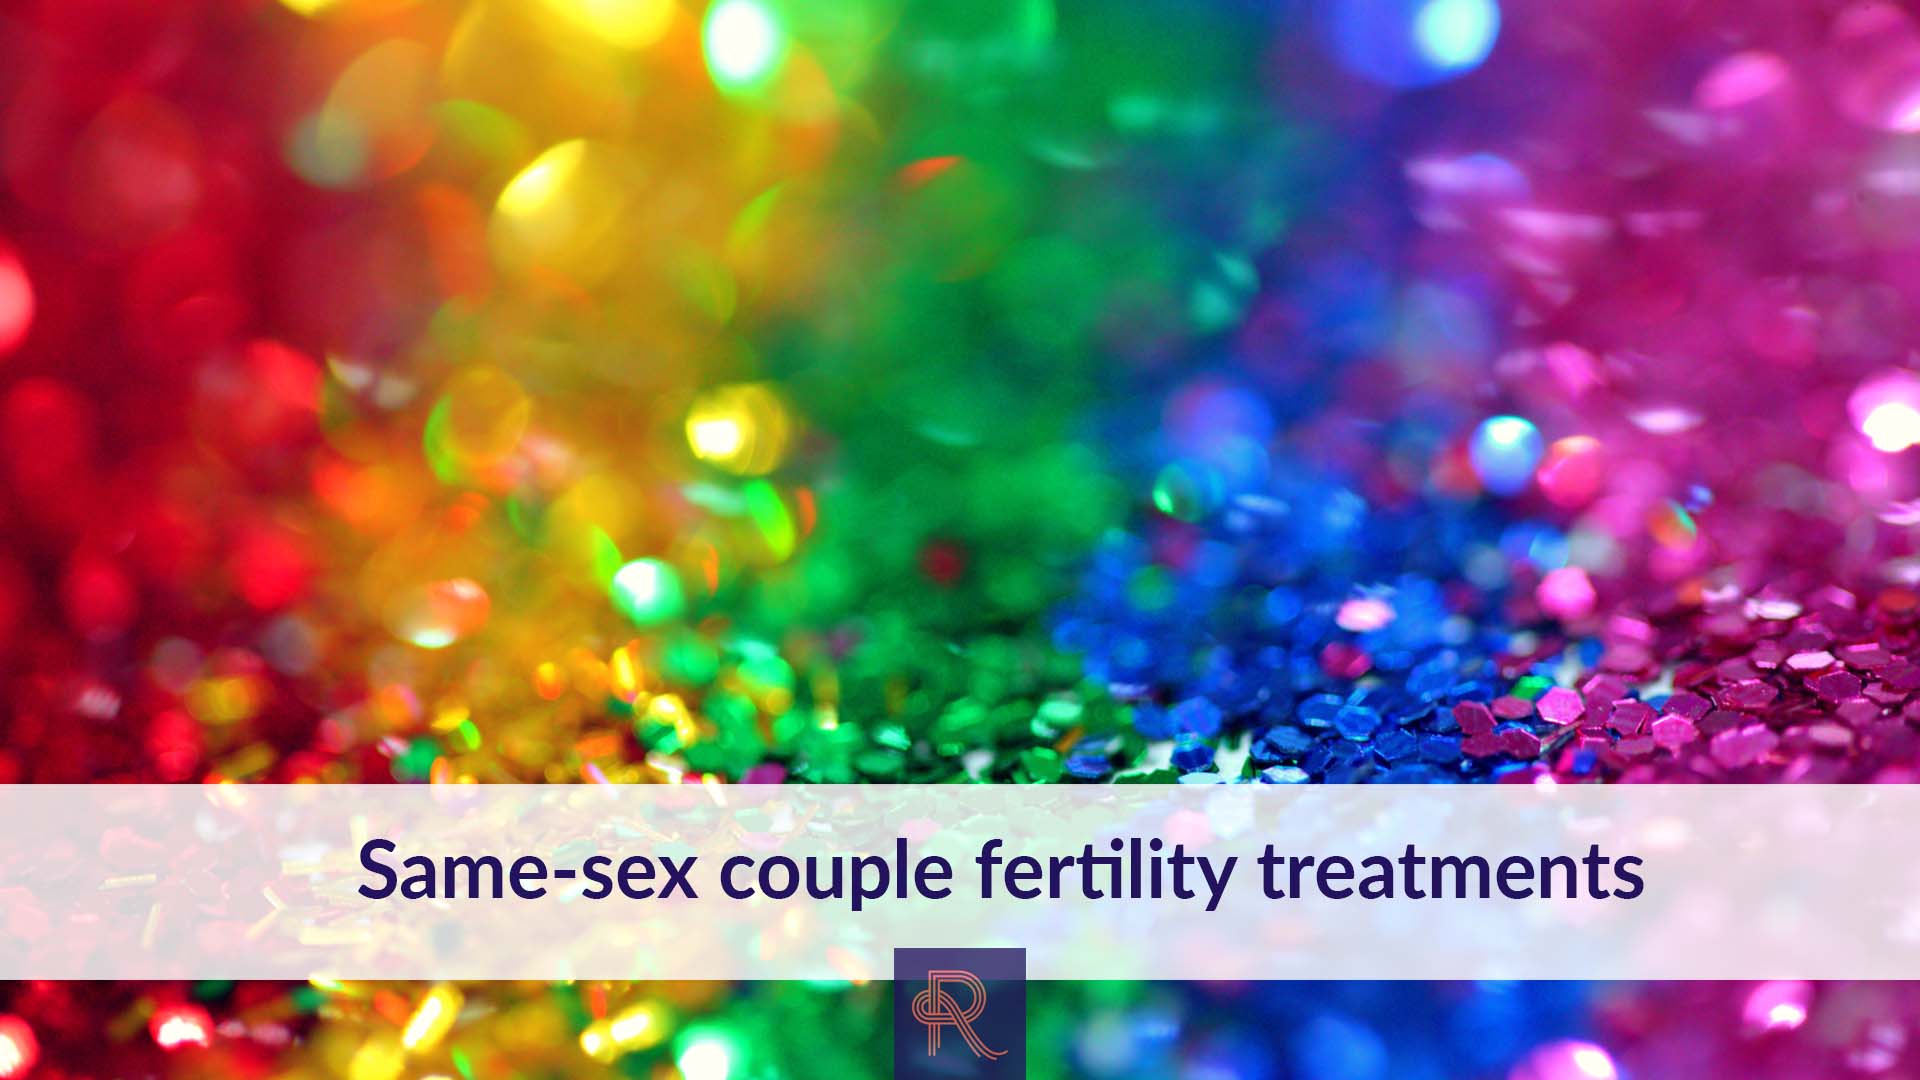 10 years celebrating Pride with same-sex couple fertility treatments